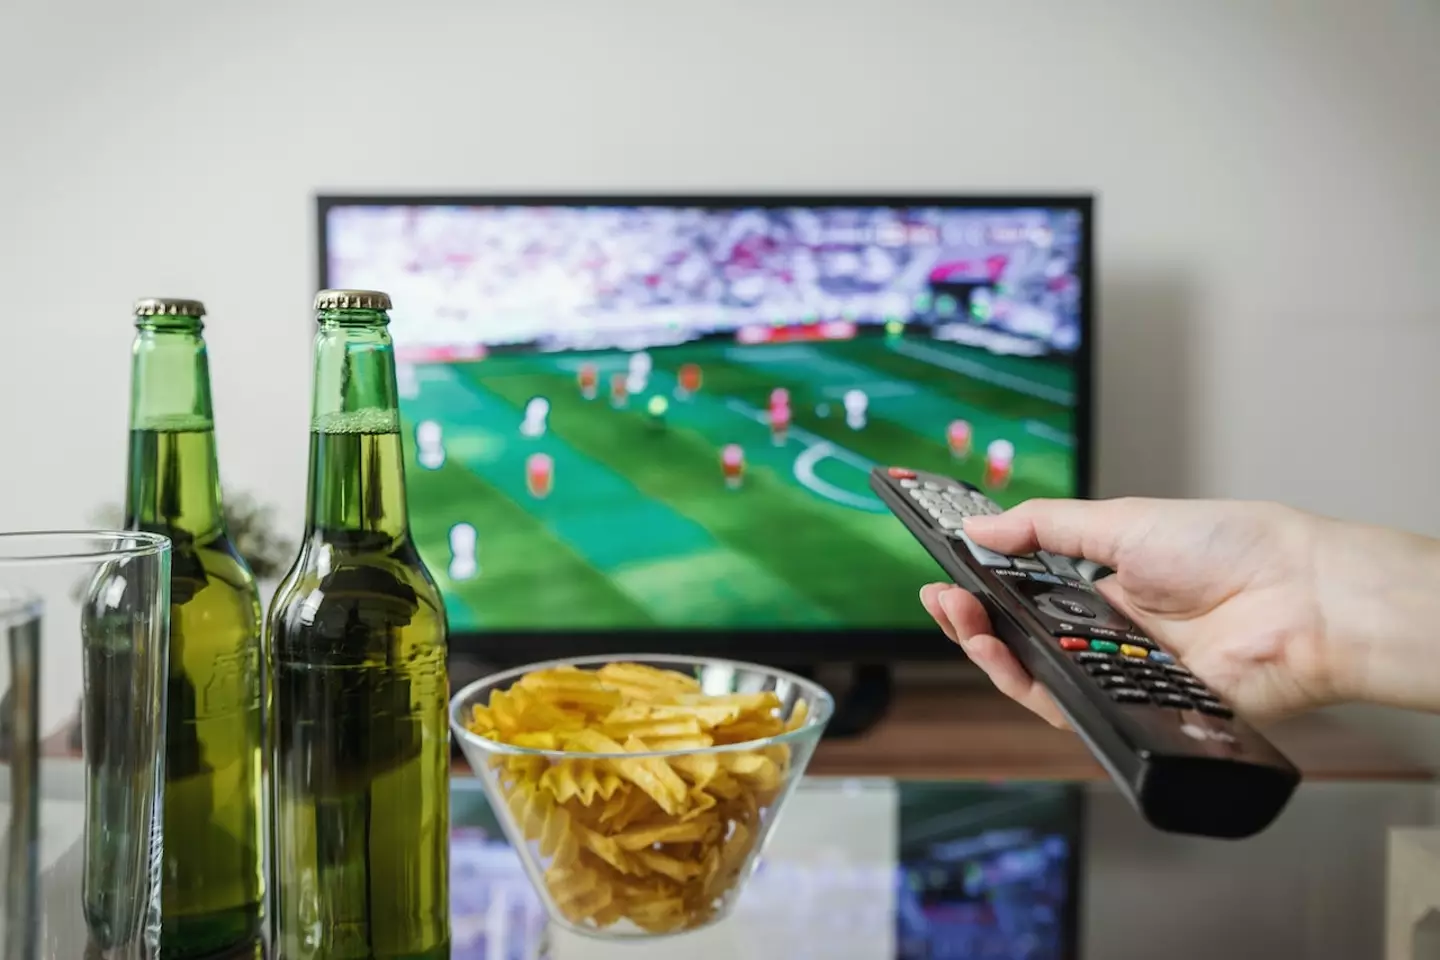 The illegal streaming gang who offered cheap subscriptions for Premier League matches have been jailed.